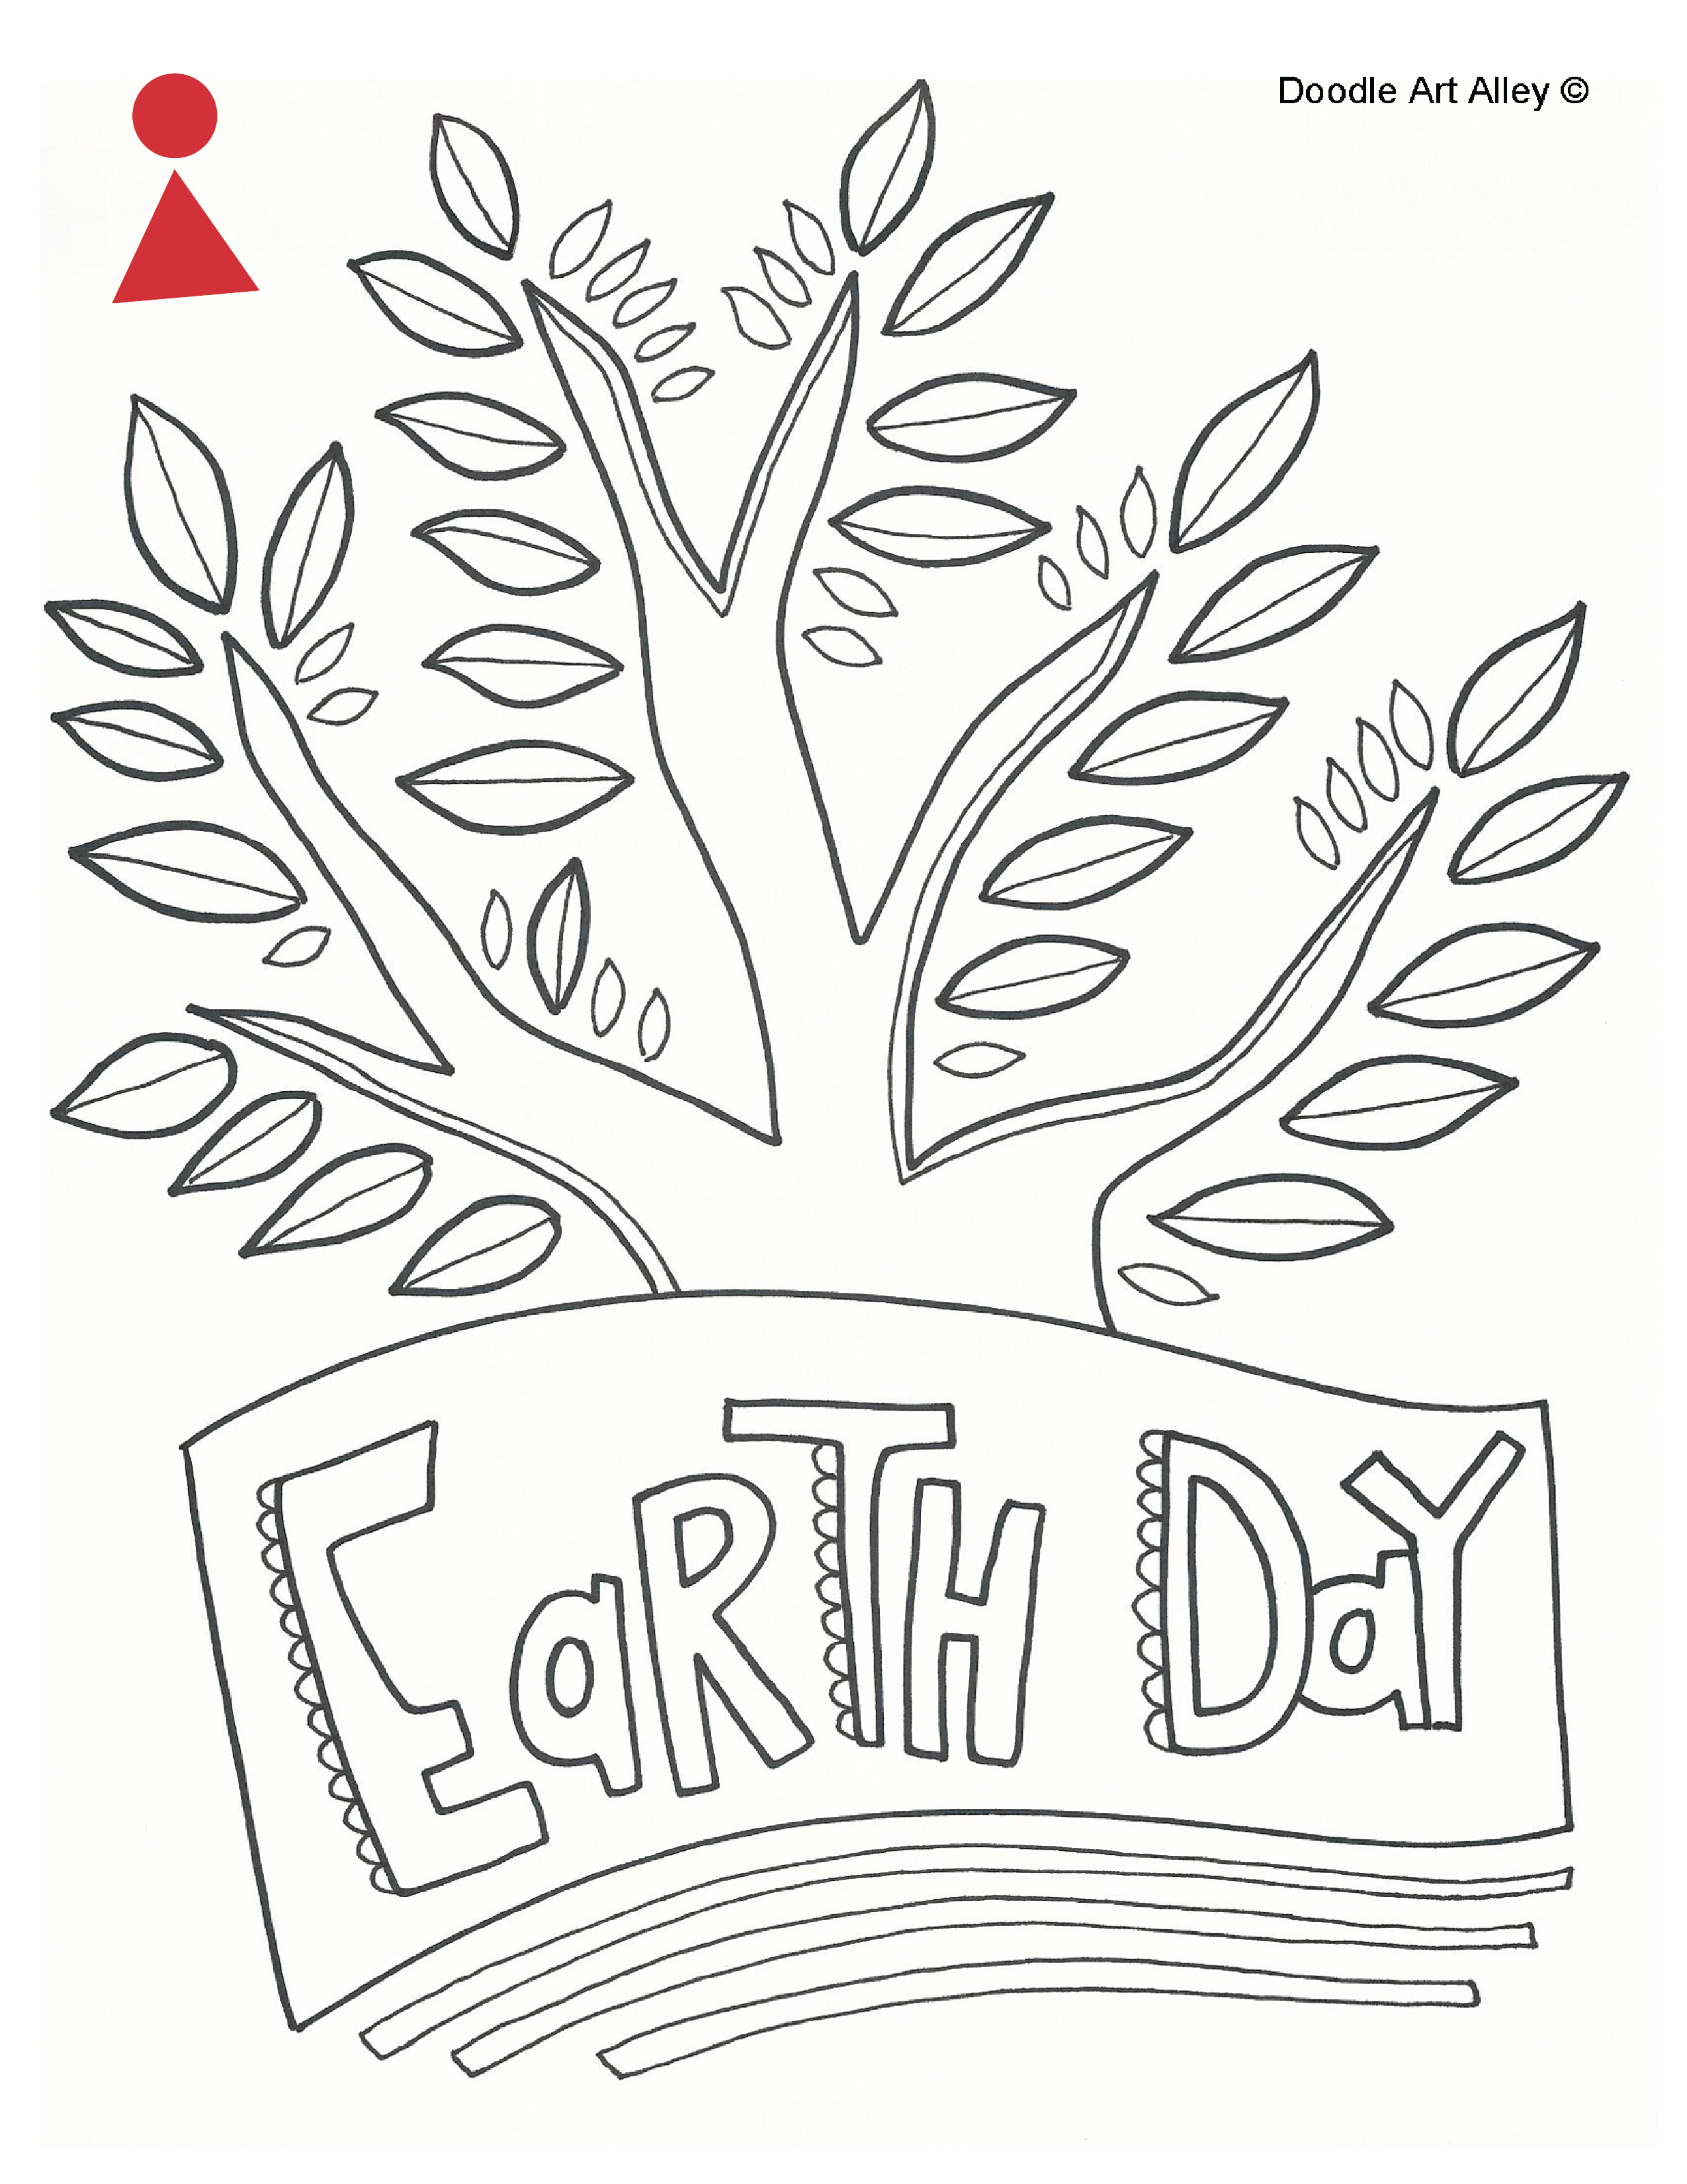 earth-day_colouring-08